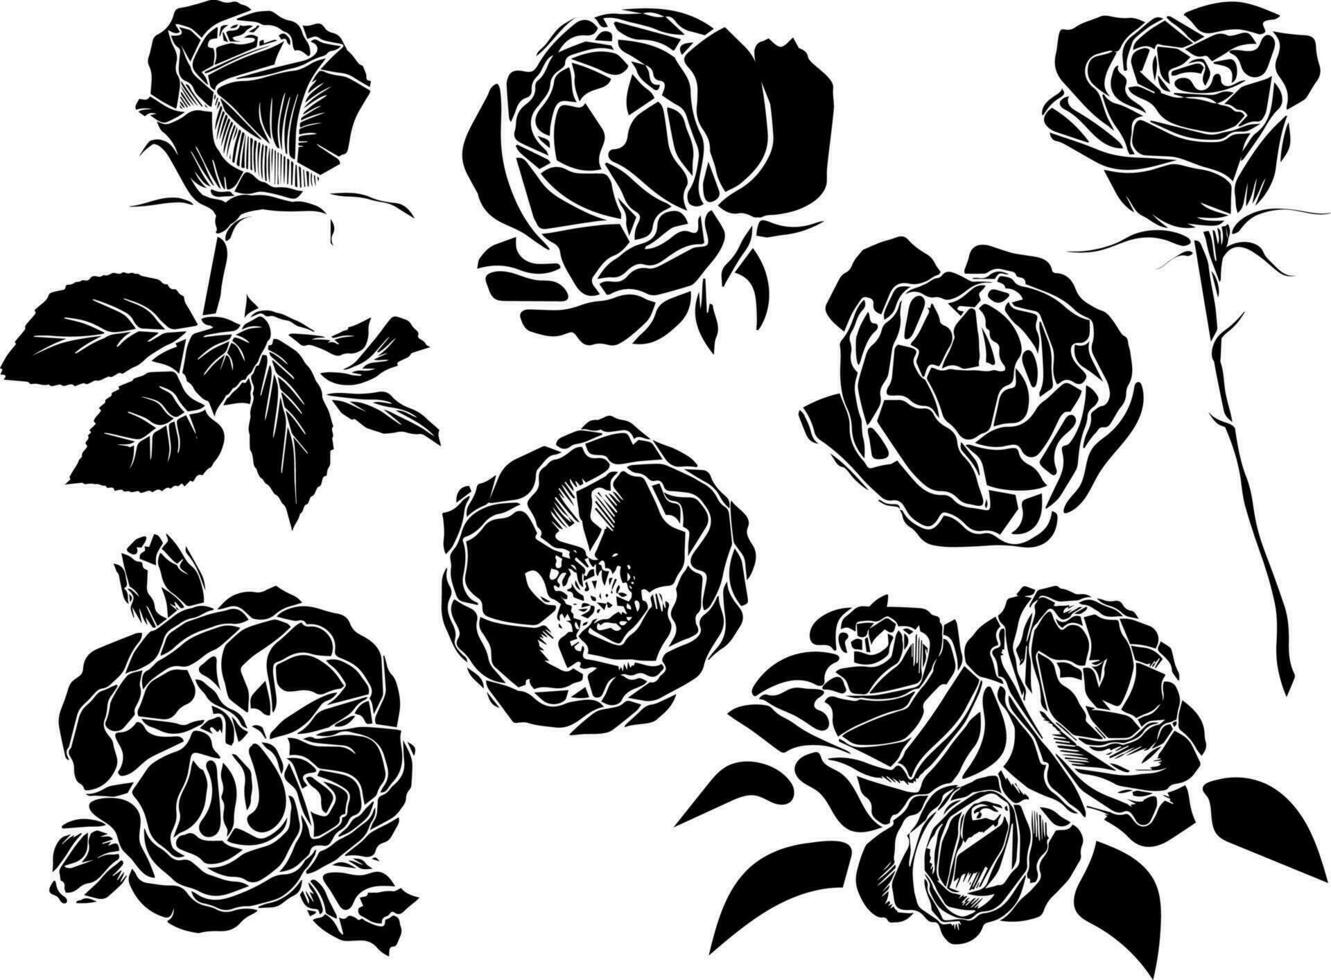 Vector set of black silhouette rose flowers with leaves and stems isolated on white background